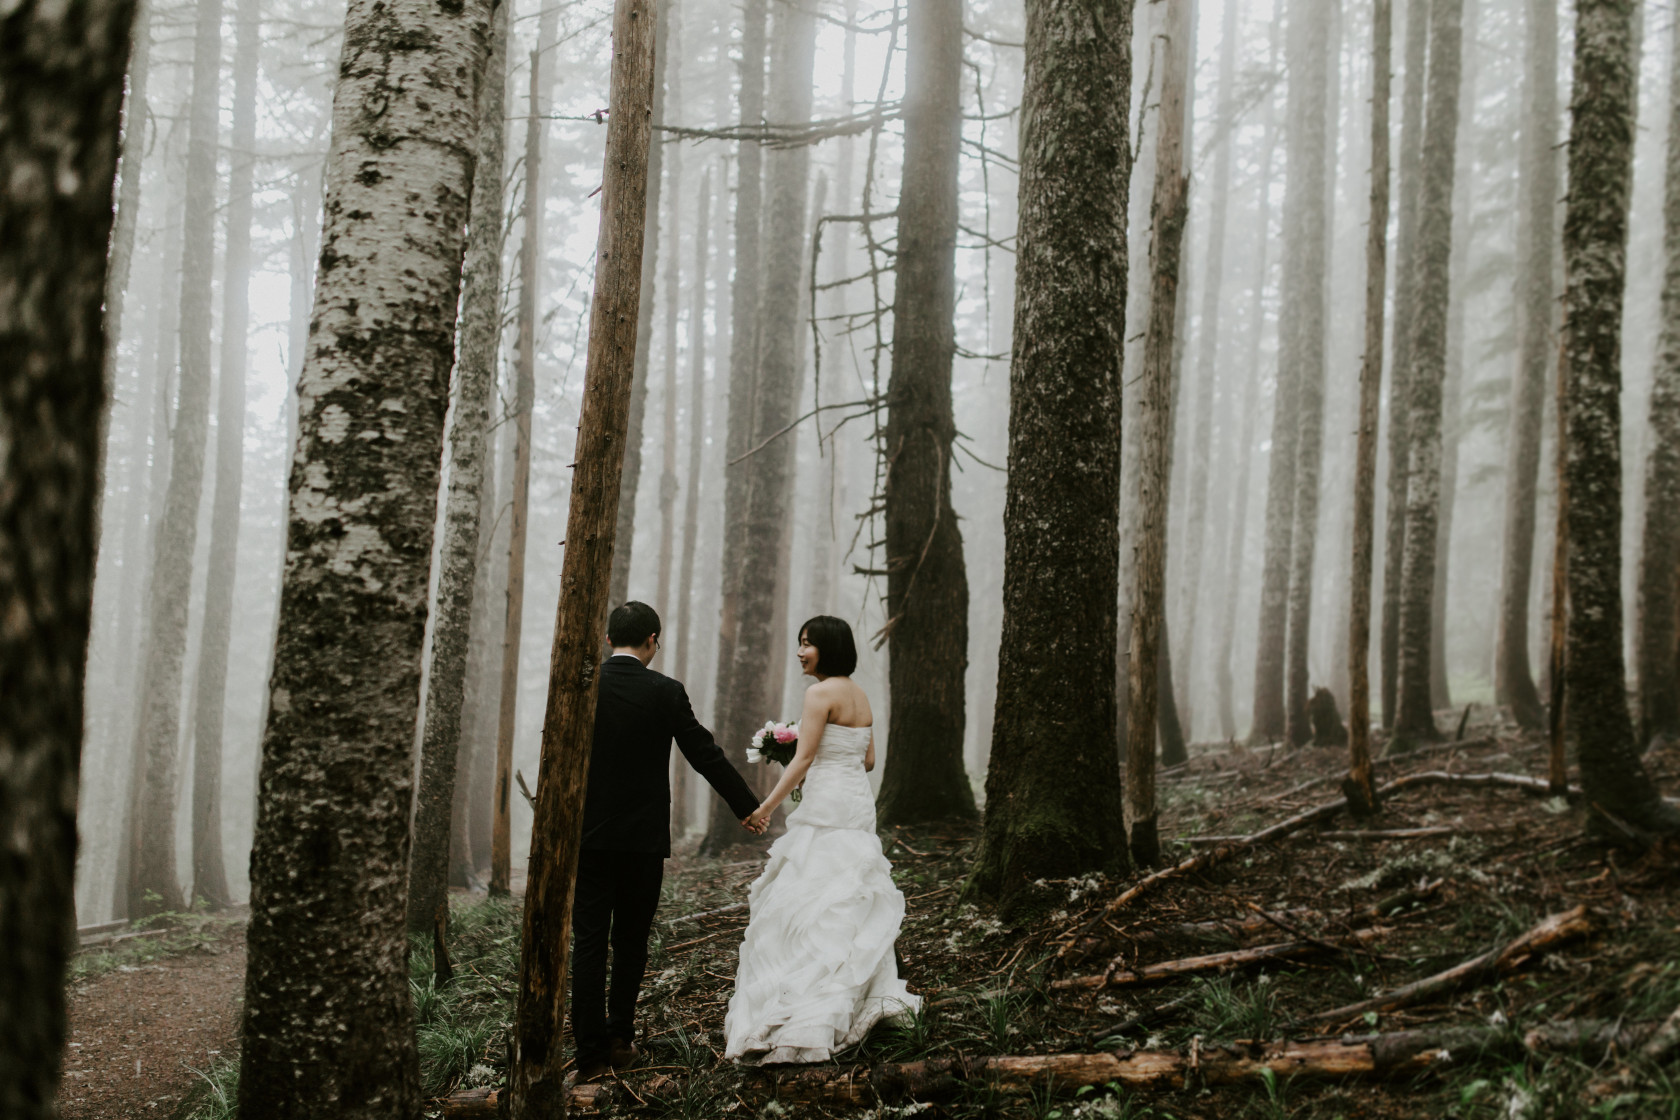 Valerie and Alex walk through the woods of Mount Hood. Elopement wedding photography at Mount Hood by Sienna Plus Josh.